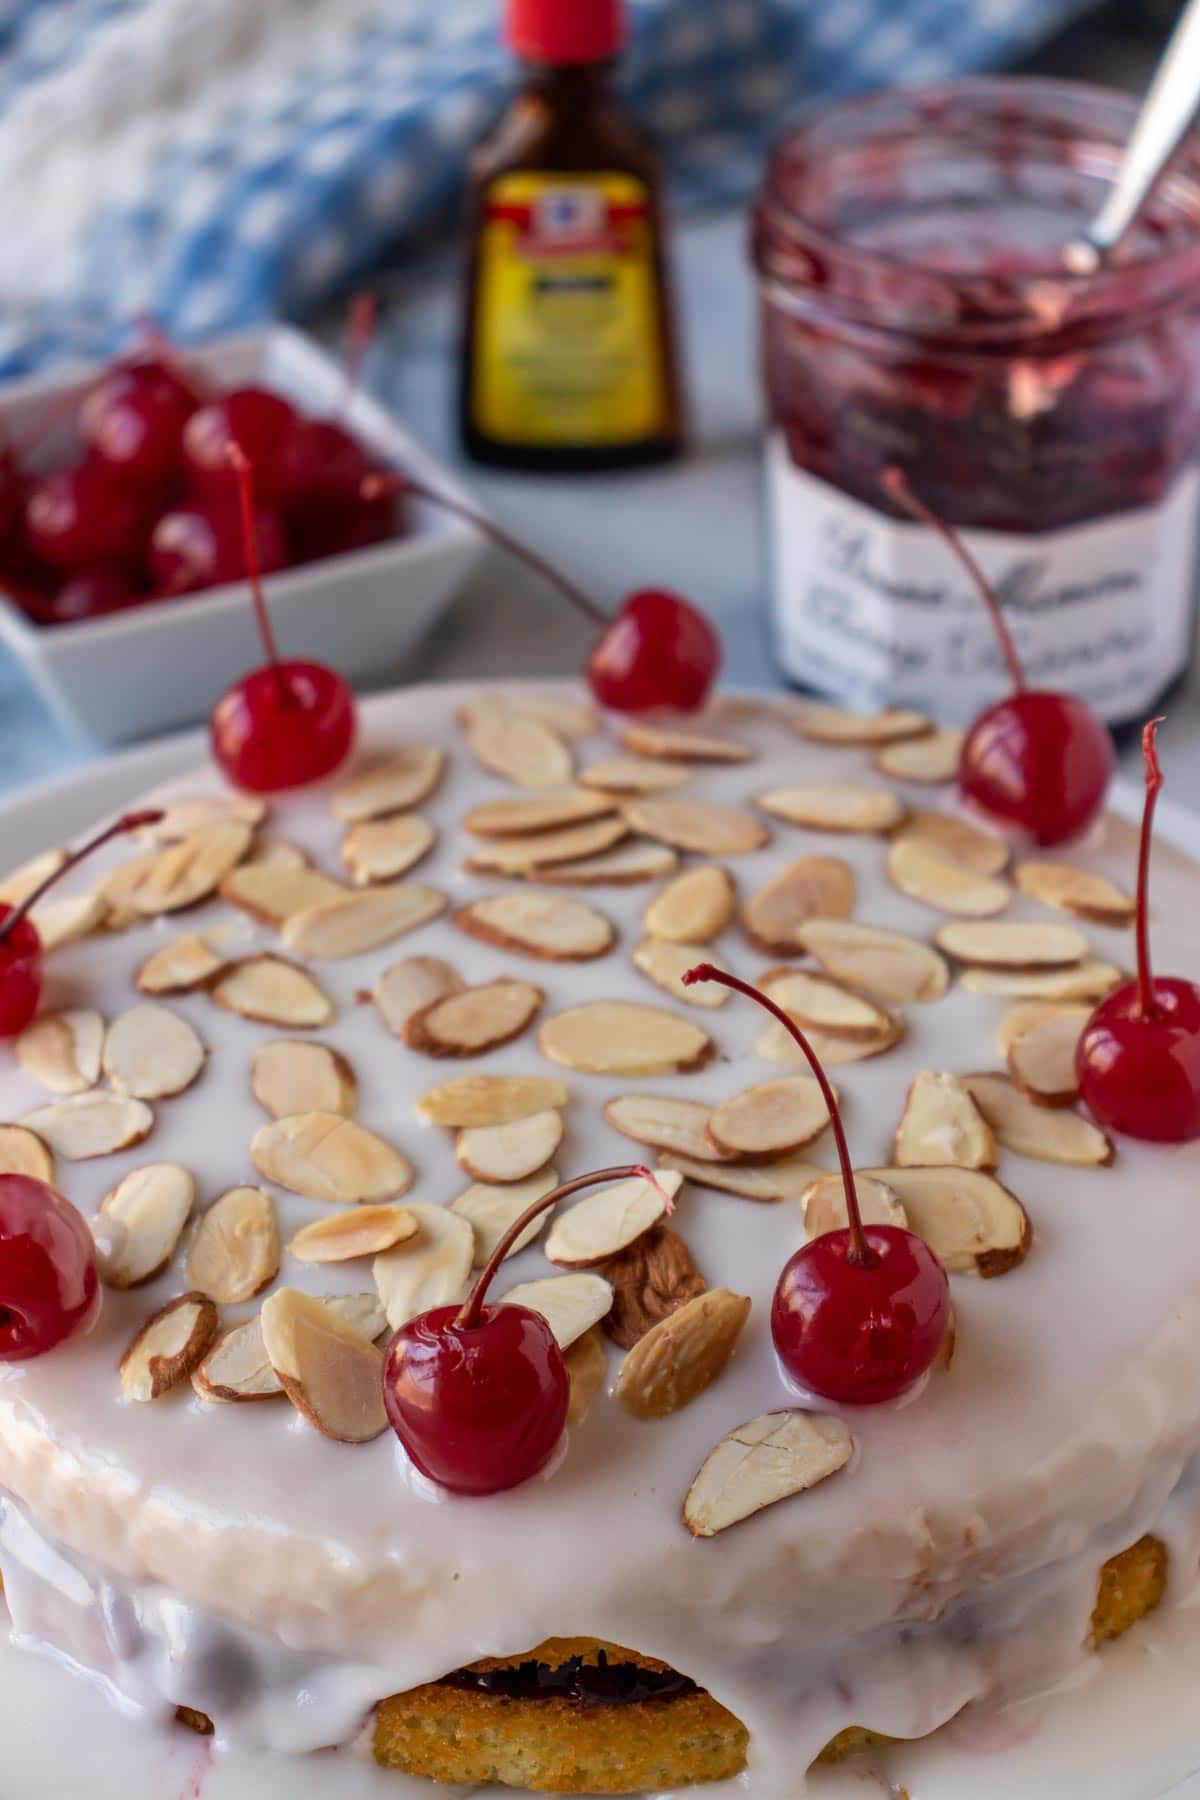 A cherry Bakewell cake garnished with almonds and cherries with a jam jar behind it.